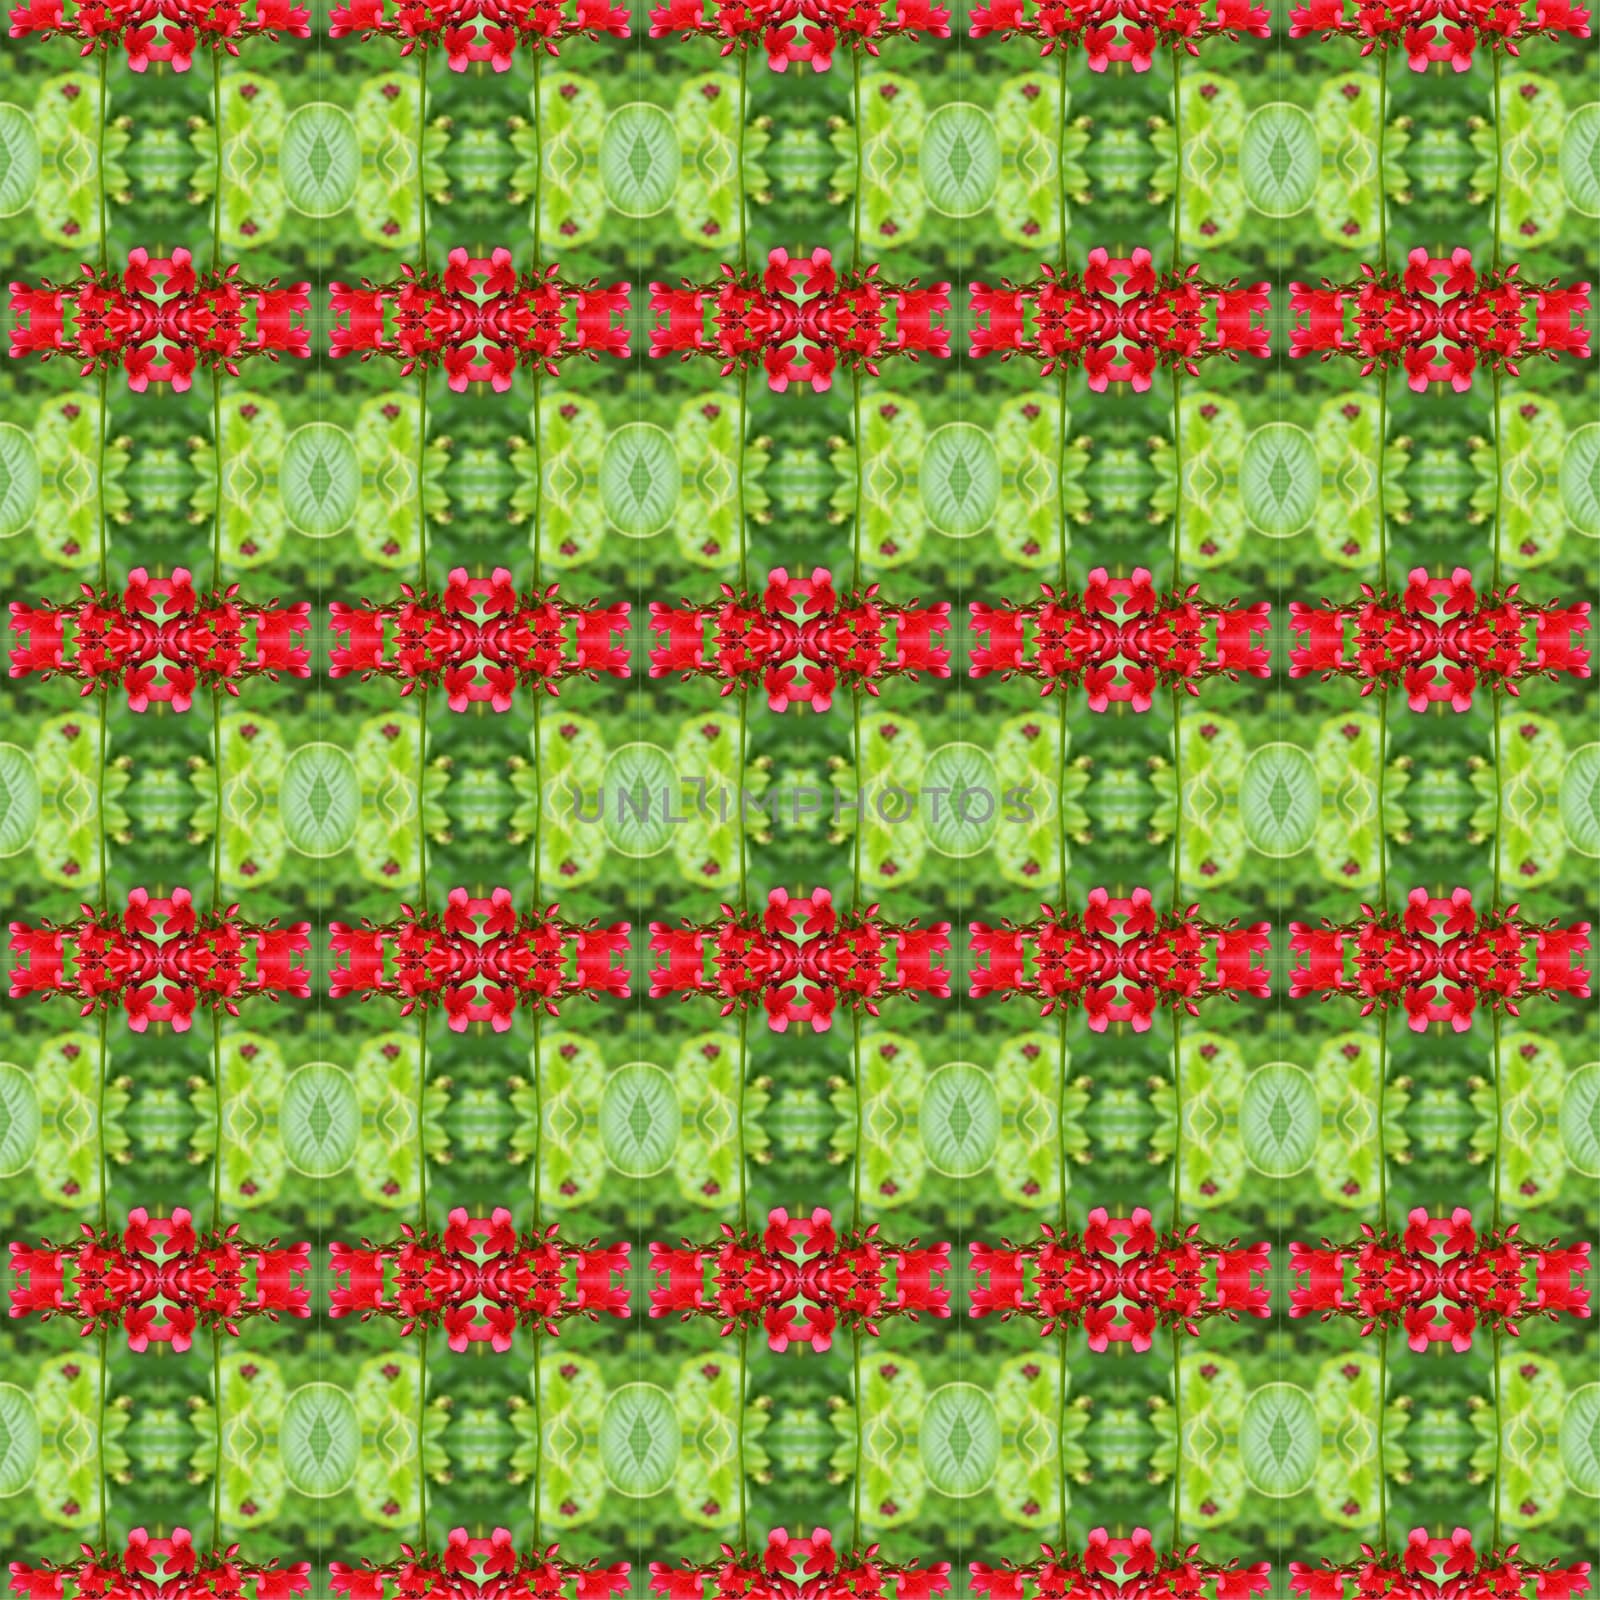 Small flowers with a bouquet of red flowers, have both buds and flower in full bloom seamless use as pattern and wallpaper.